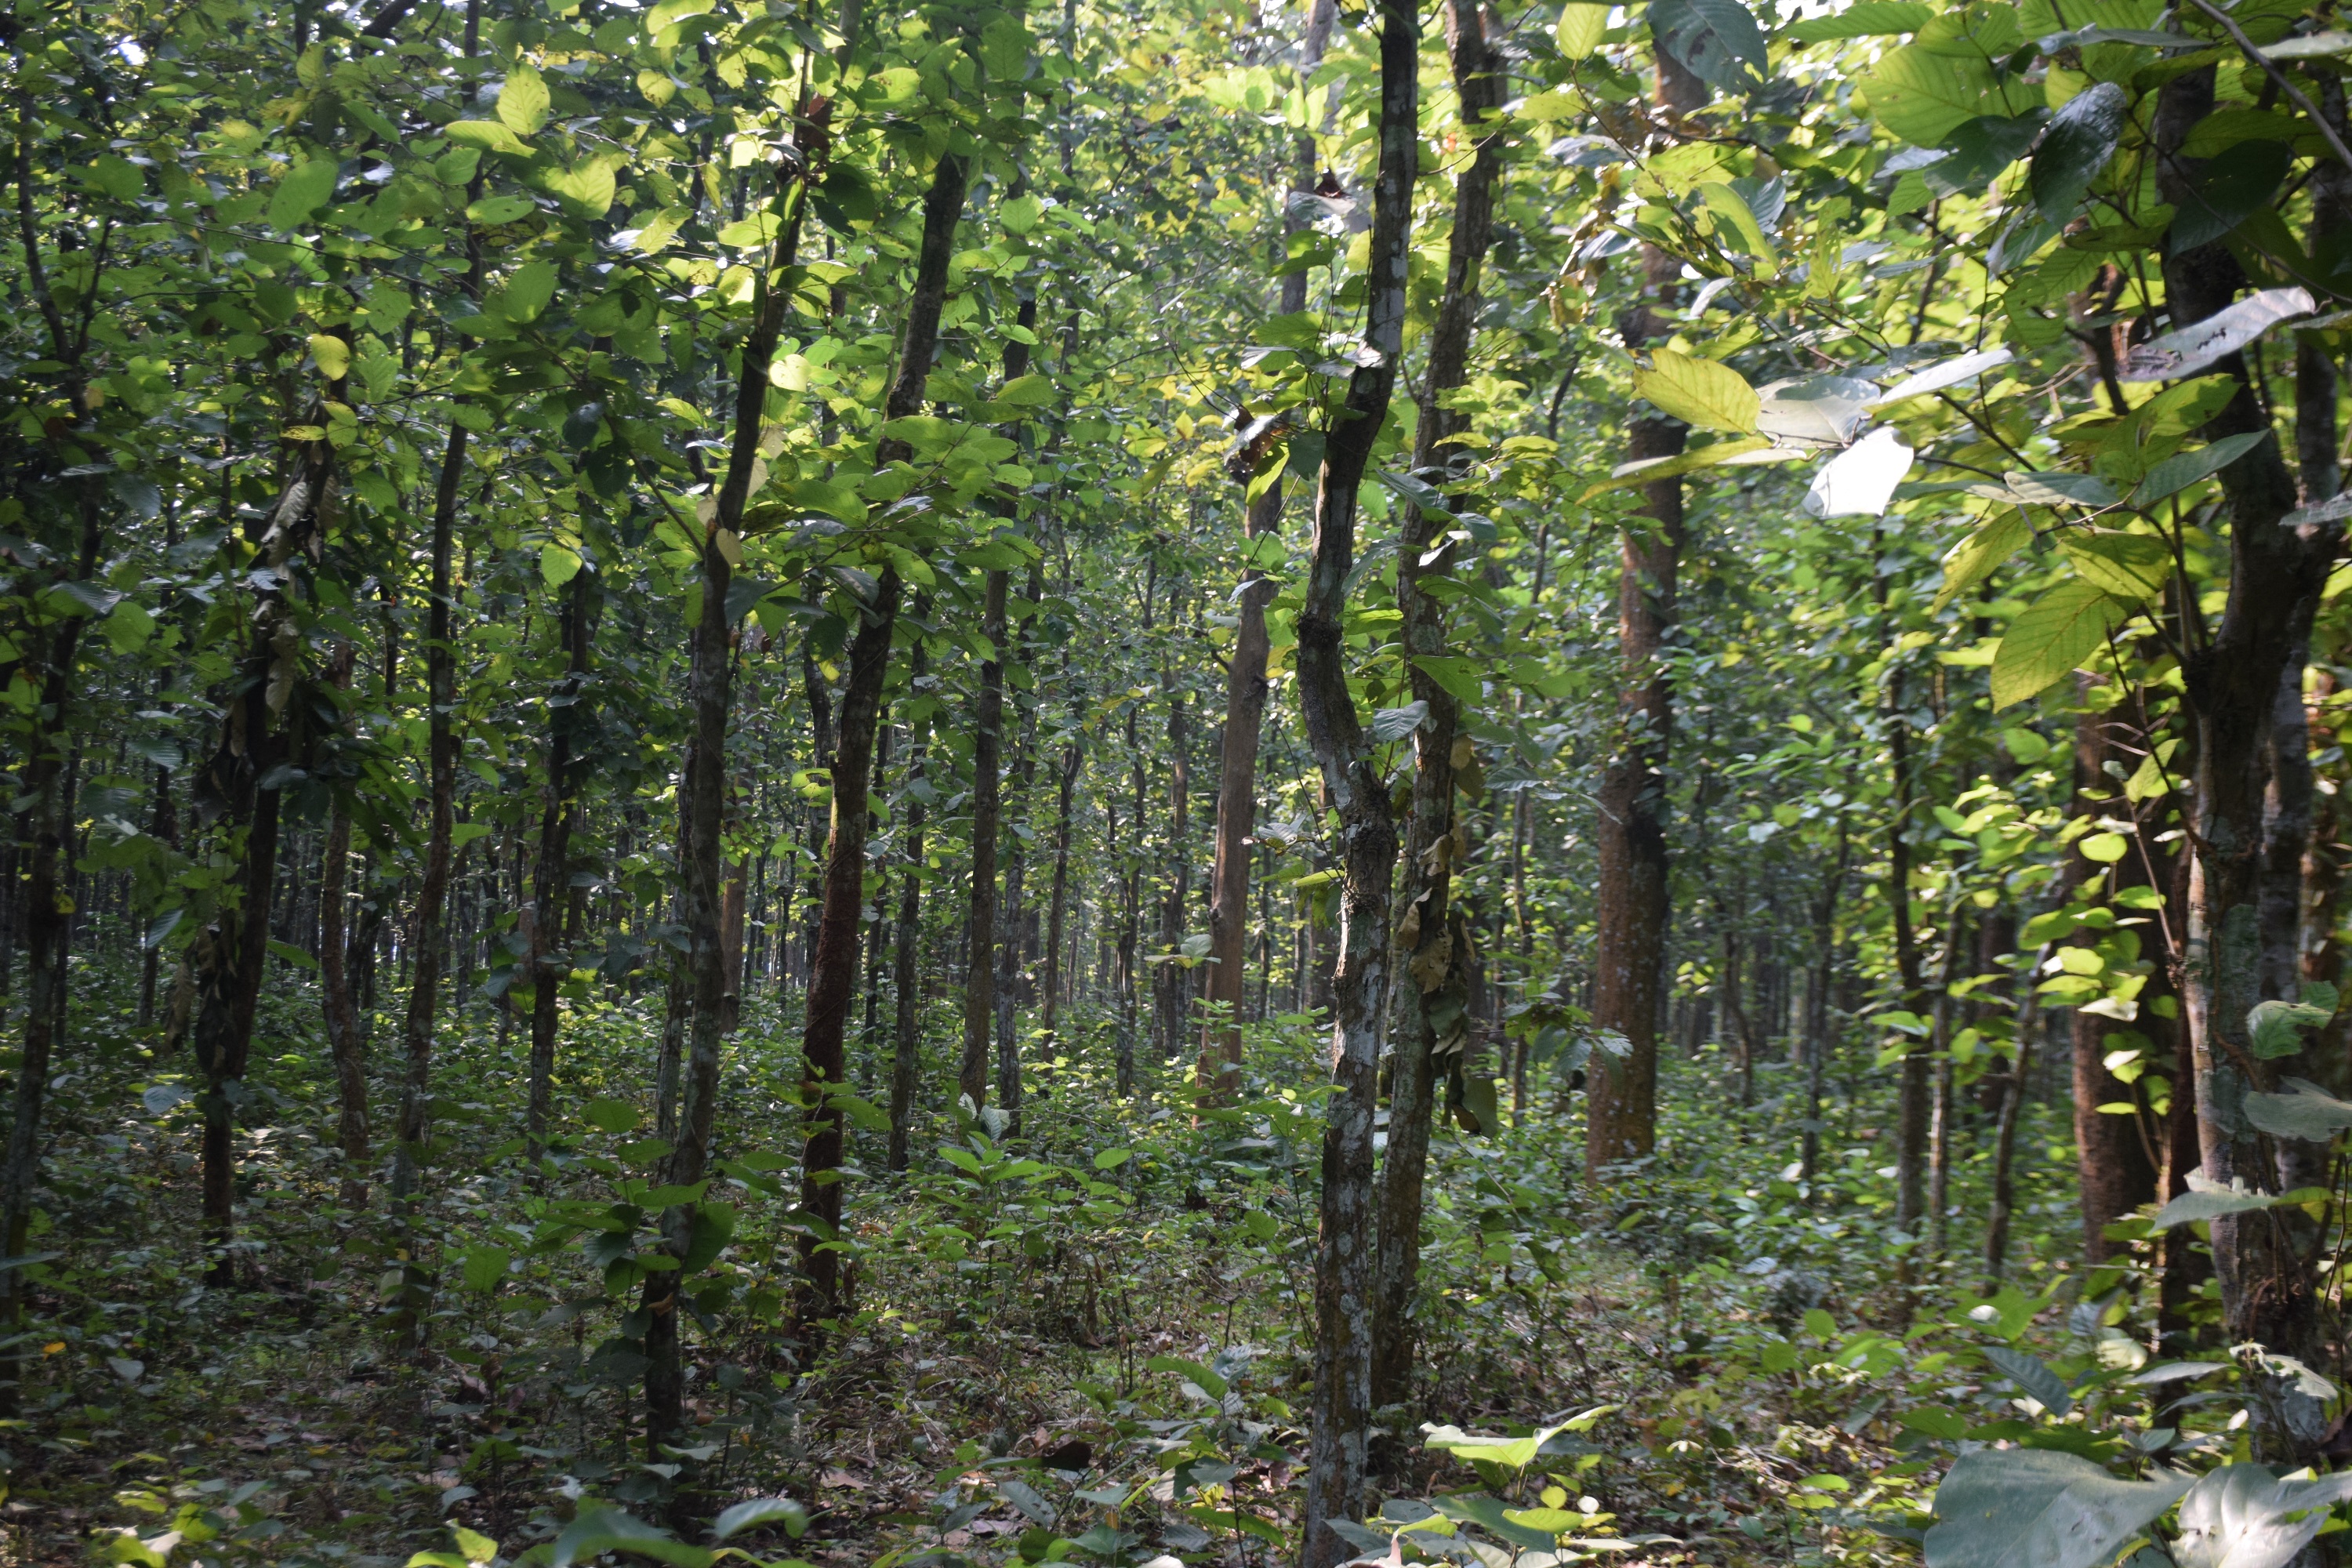 Coppice management of Sal (Shorea robusta) forest